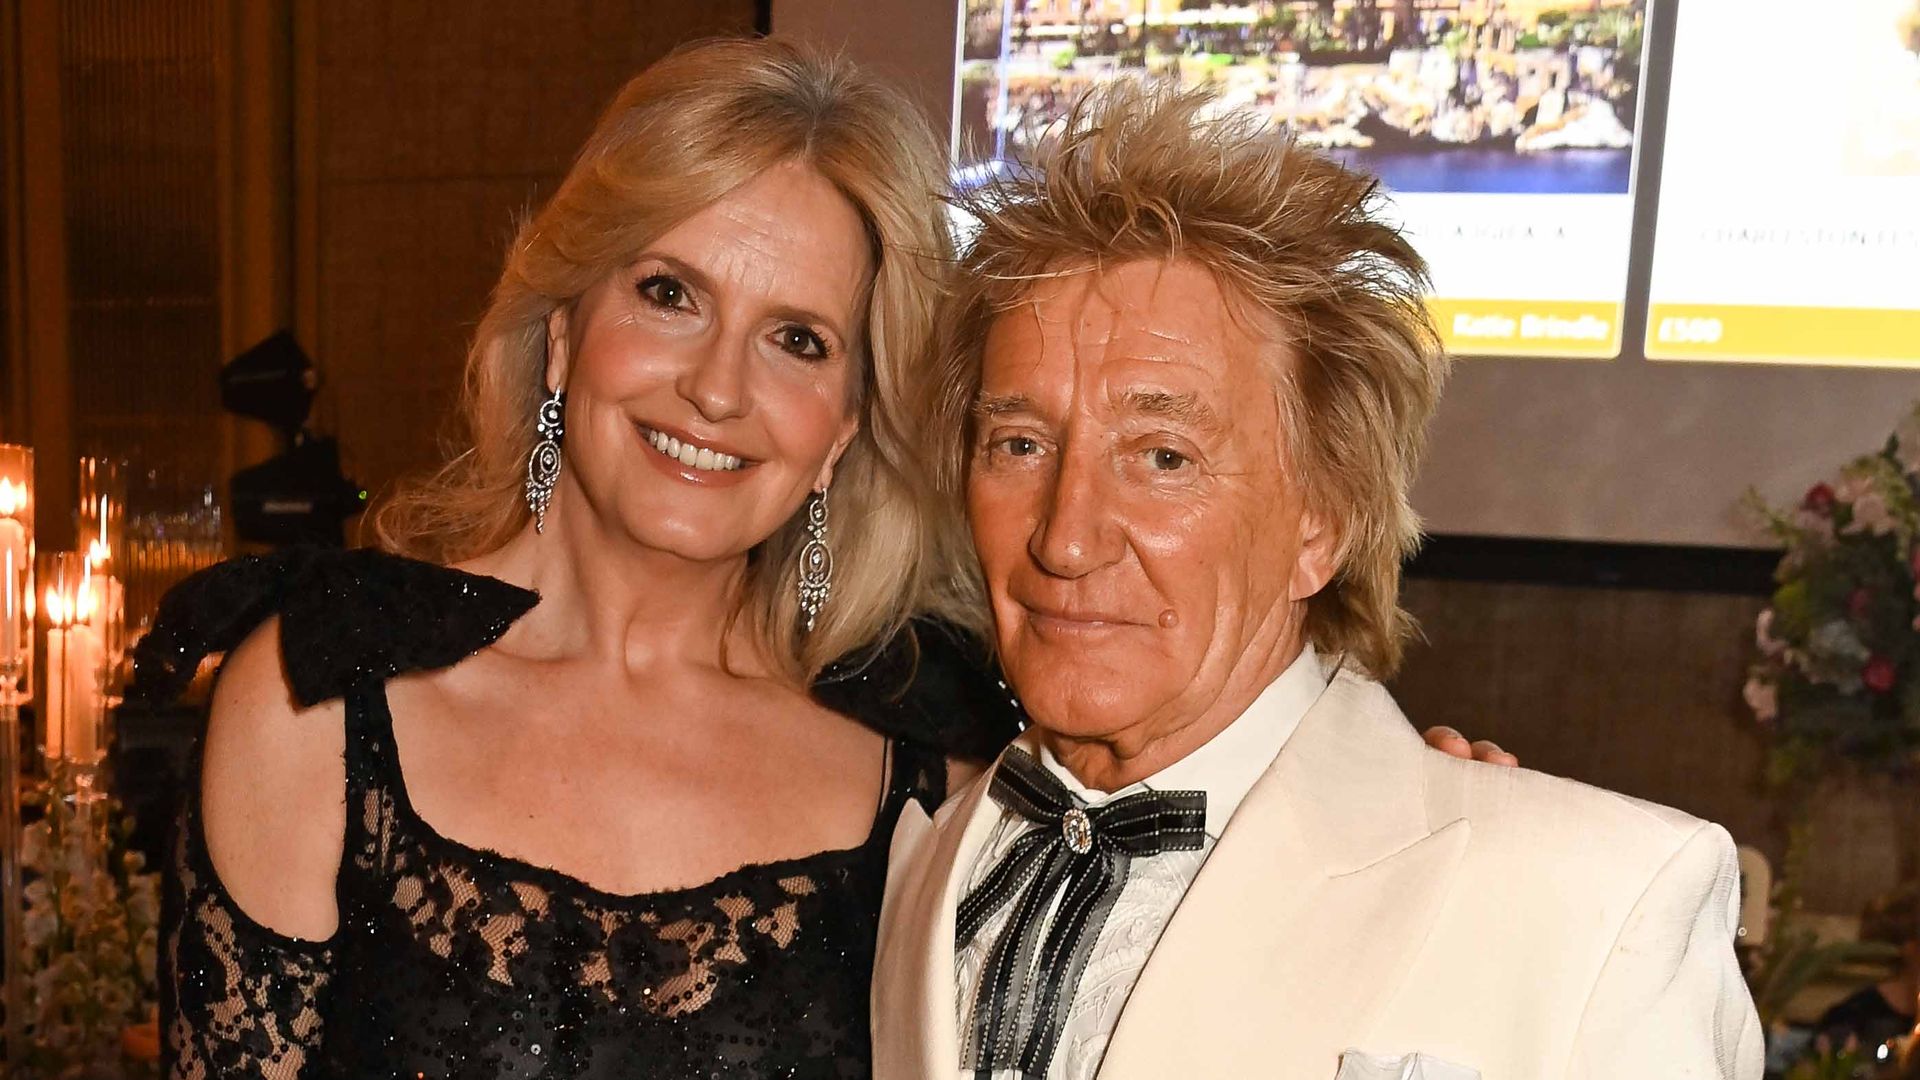 Penny Lancaster in a black lace dress standing with Rod Stewart in a white suit jacket and black trousers